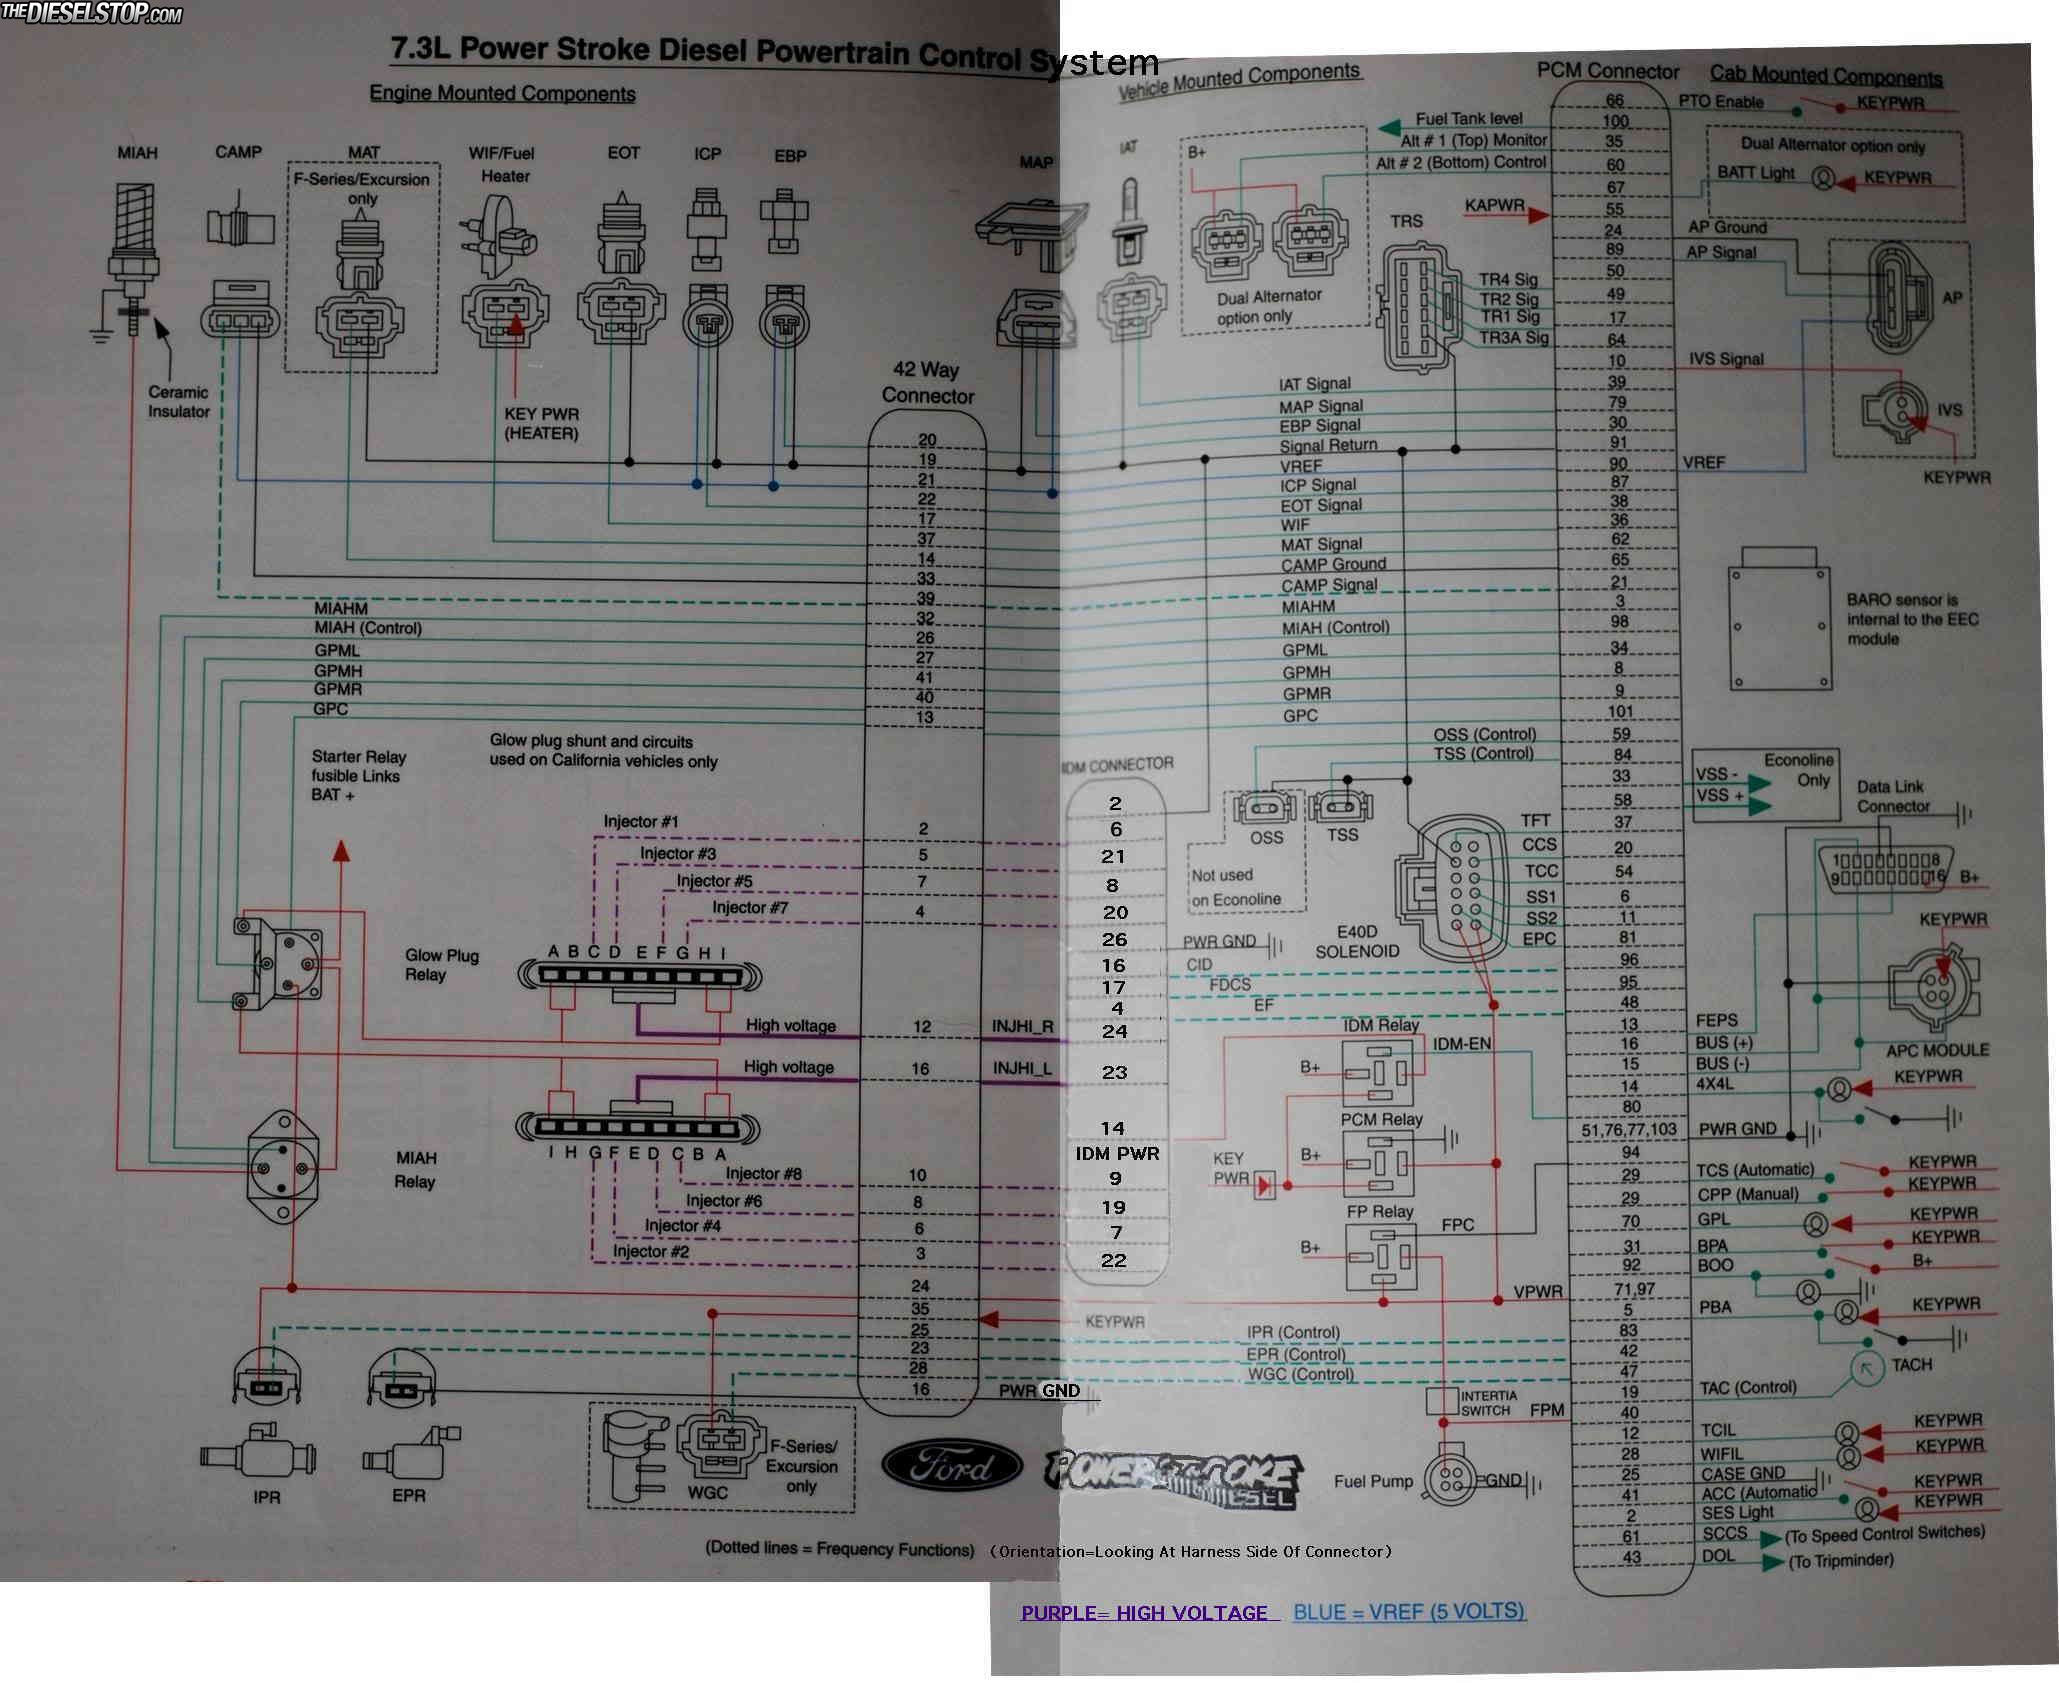 Ford F550 Wiring Diagram from www2.picturepush.com